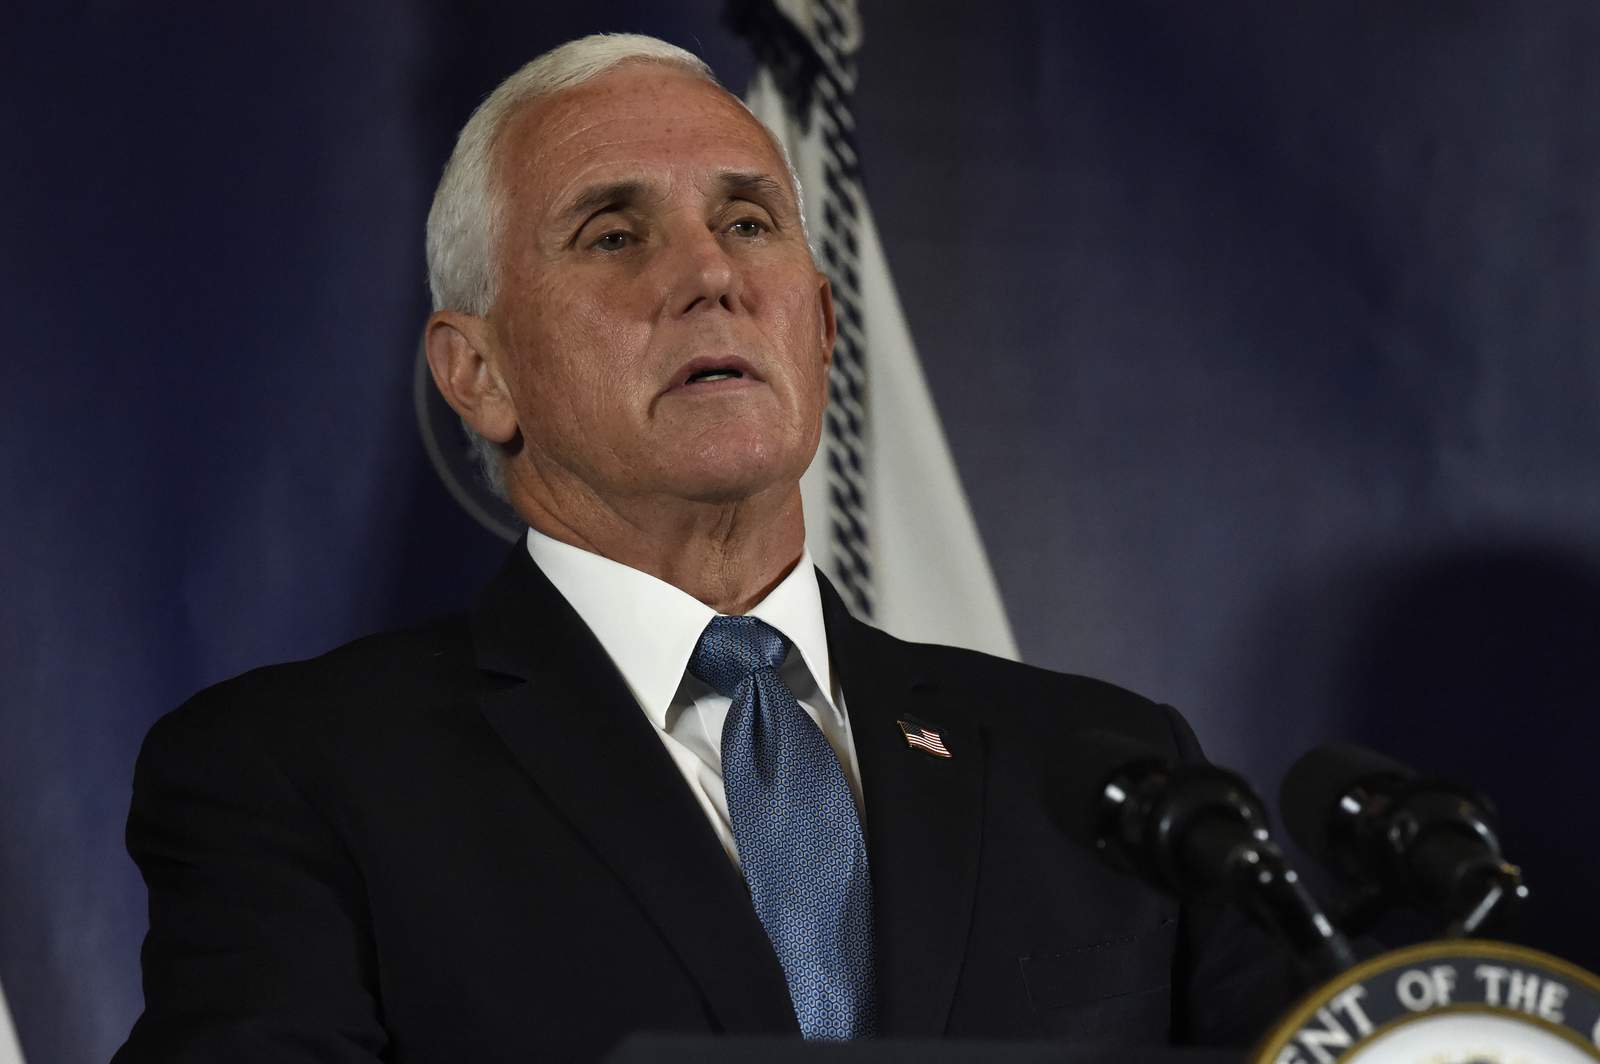 Pence defends outbreak response, pushes against shutdowns